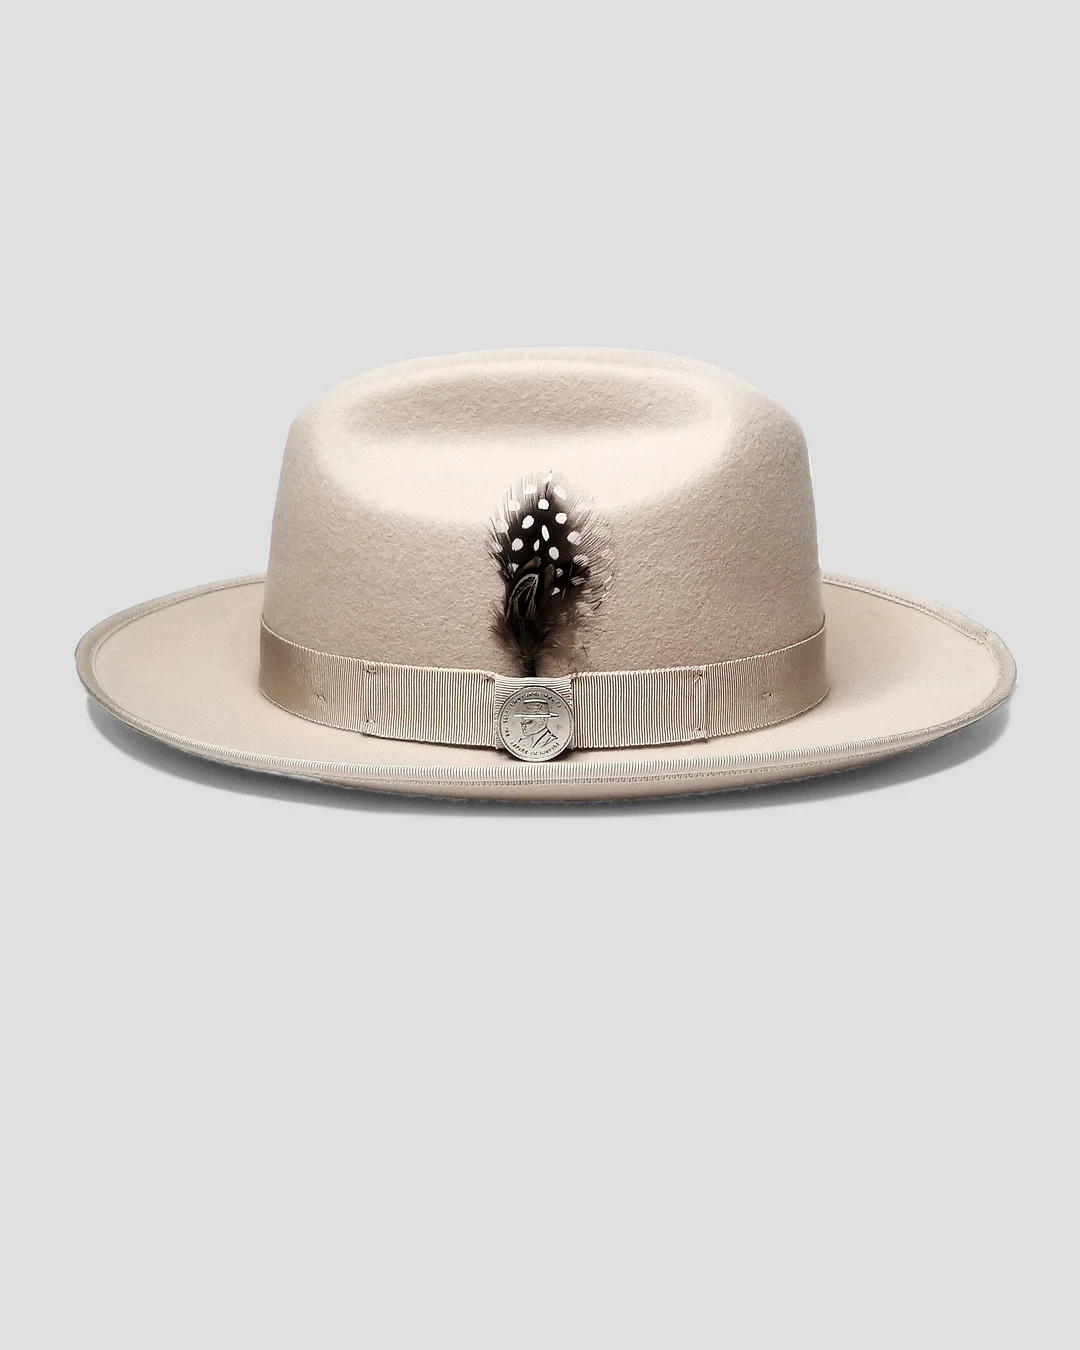 Miller Ranch Fedora - Tusk[Fast shipping and box packing]